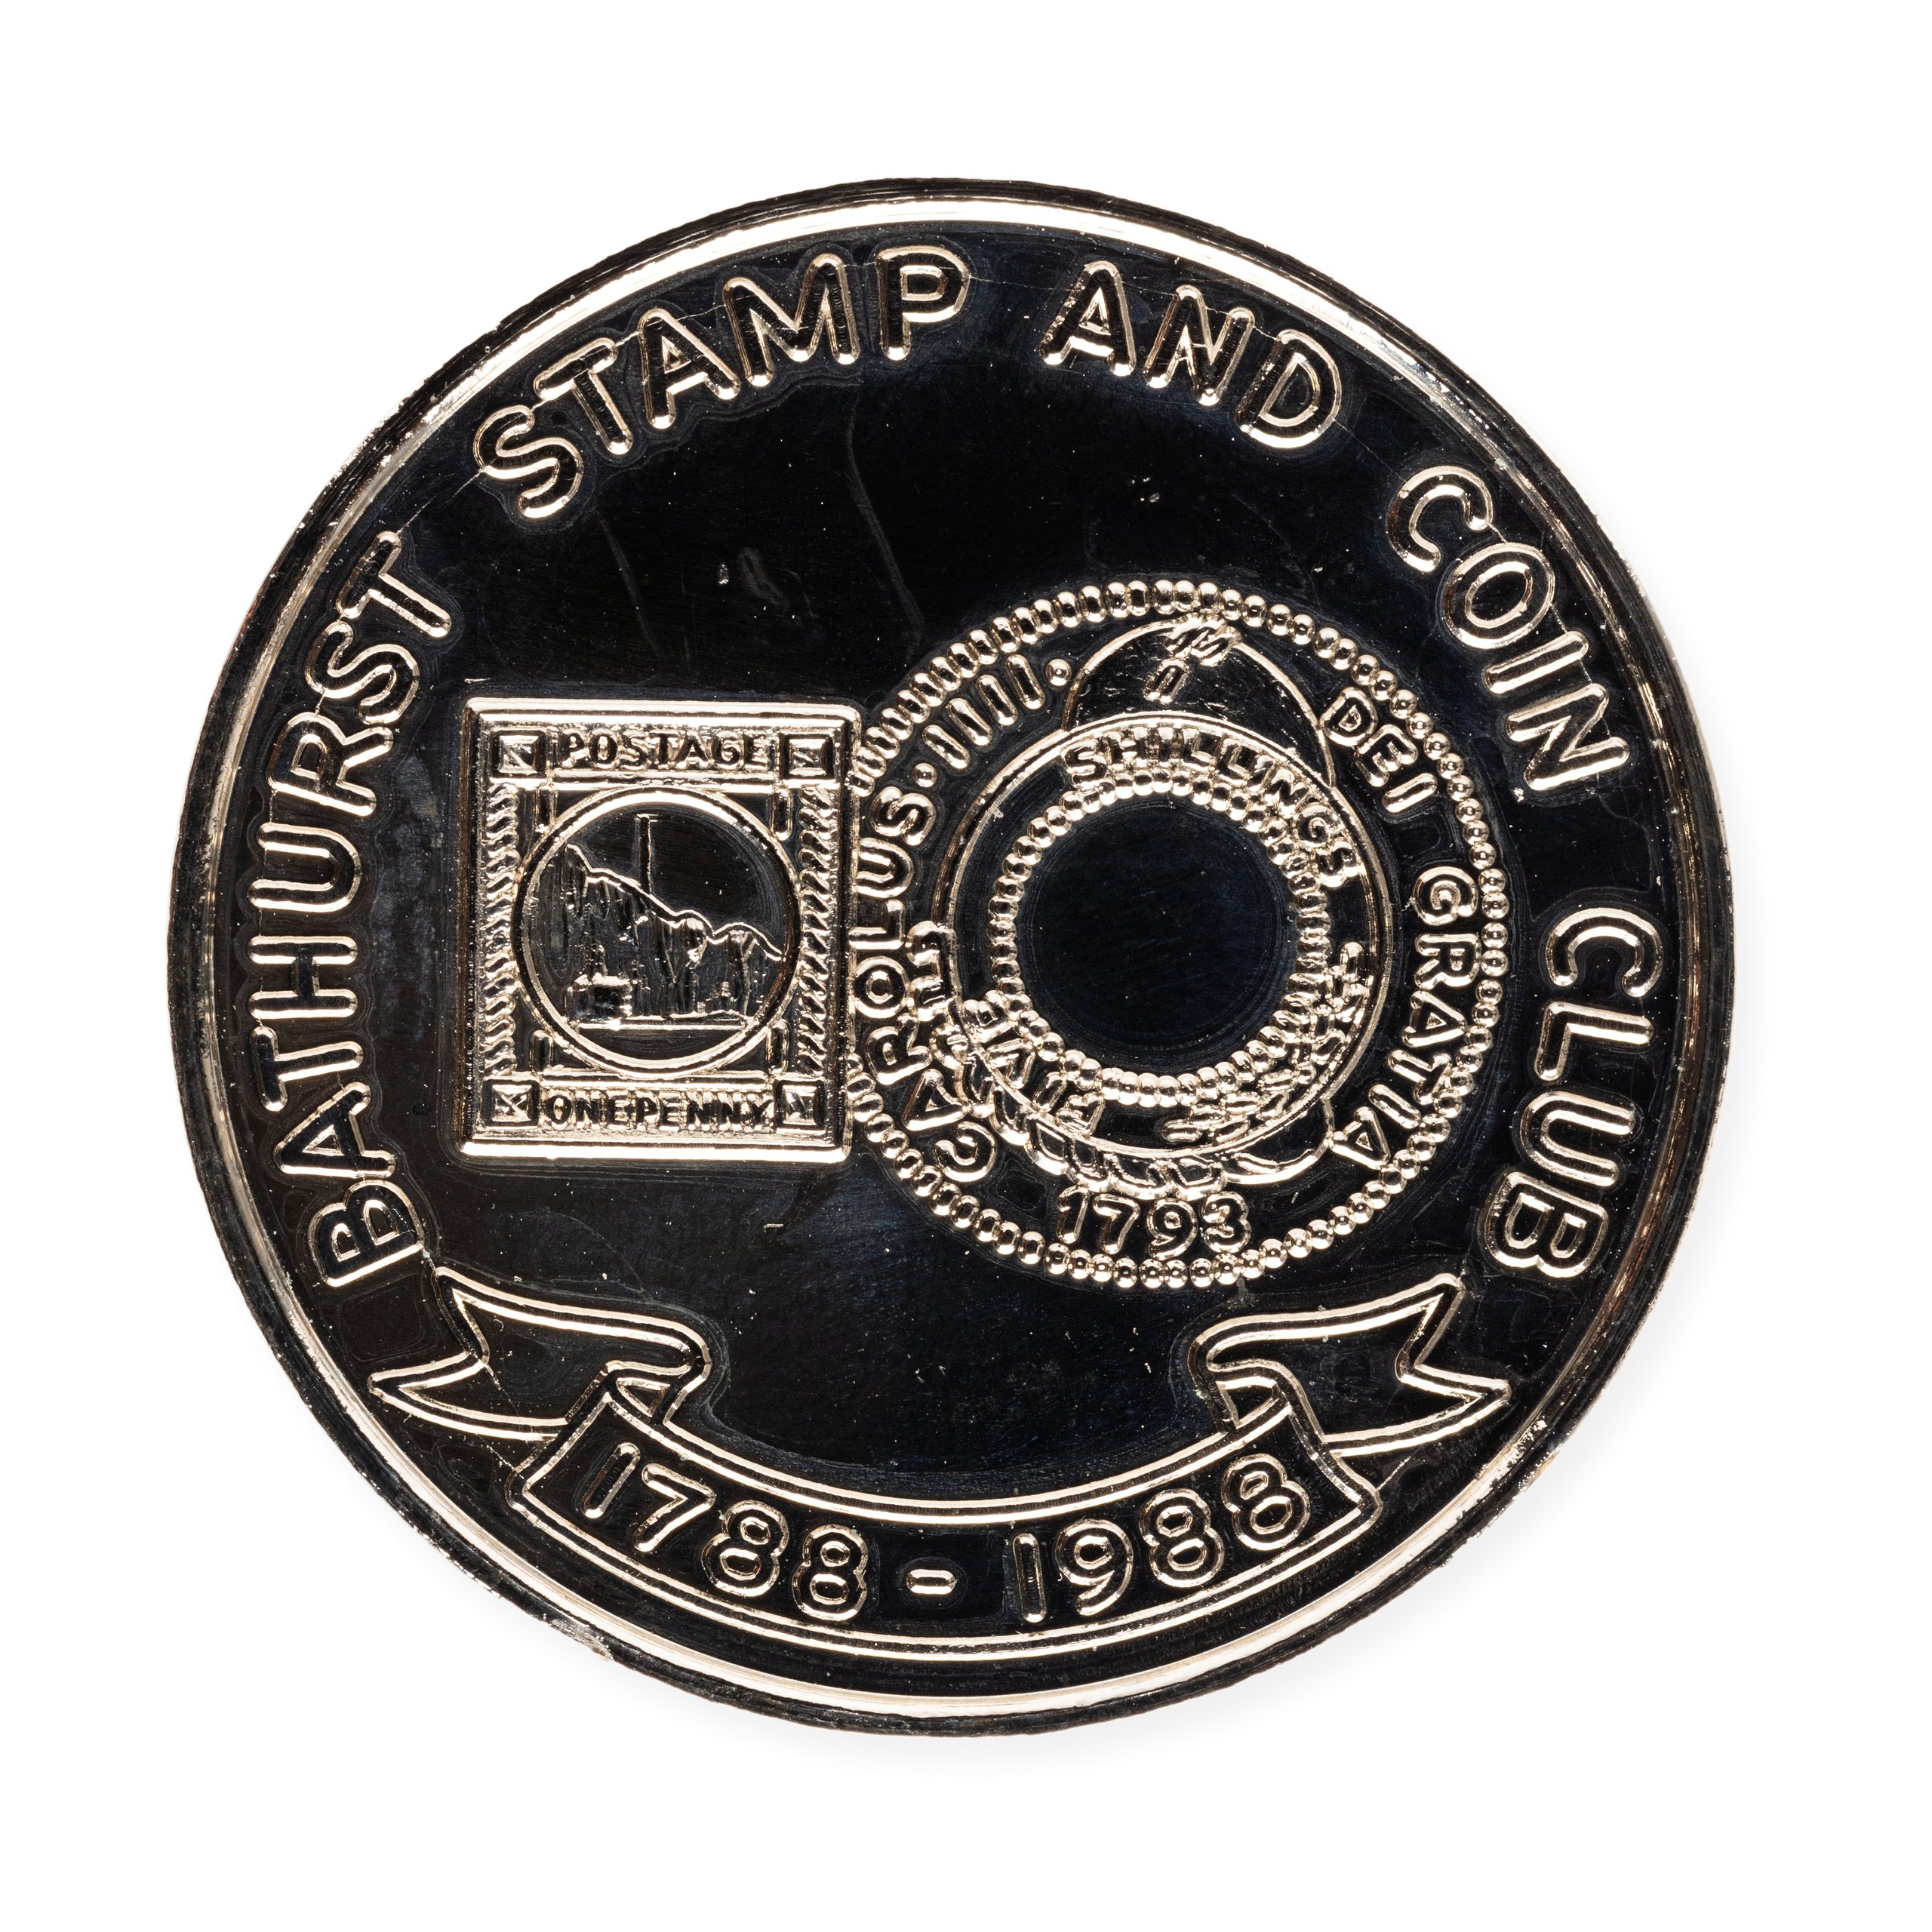 Bathurst Stamp and Coin Club commemorative medallion